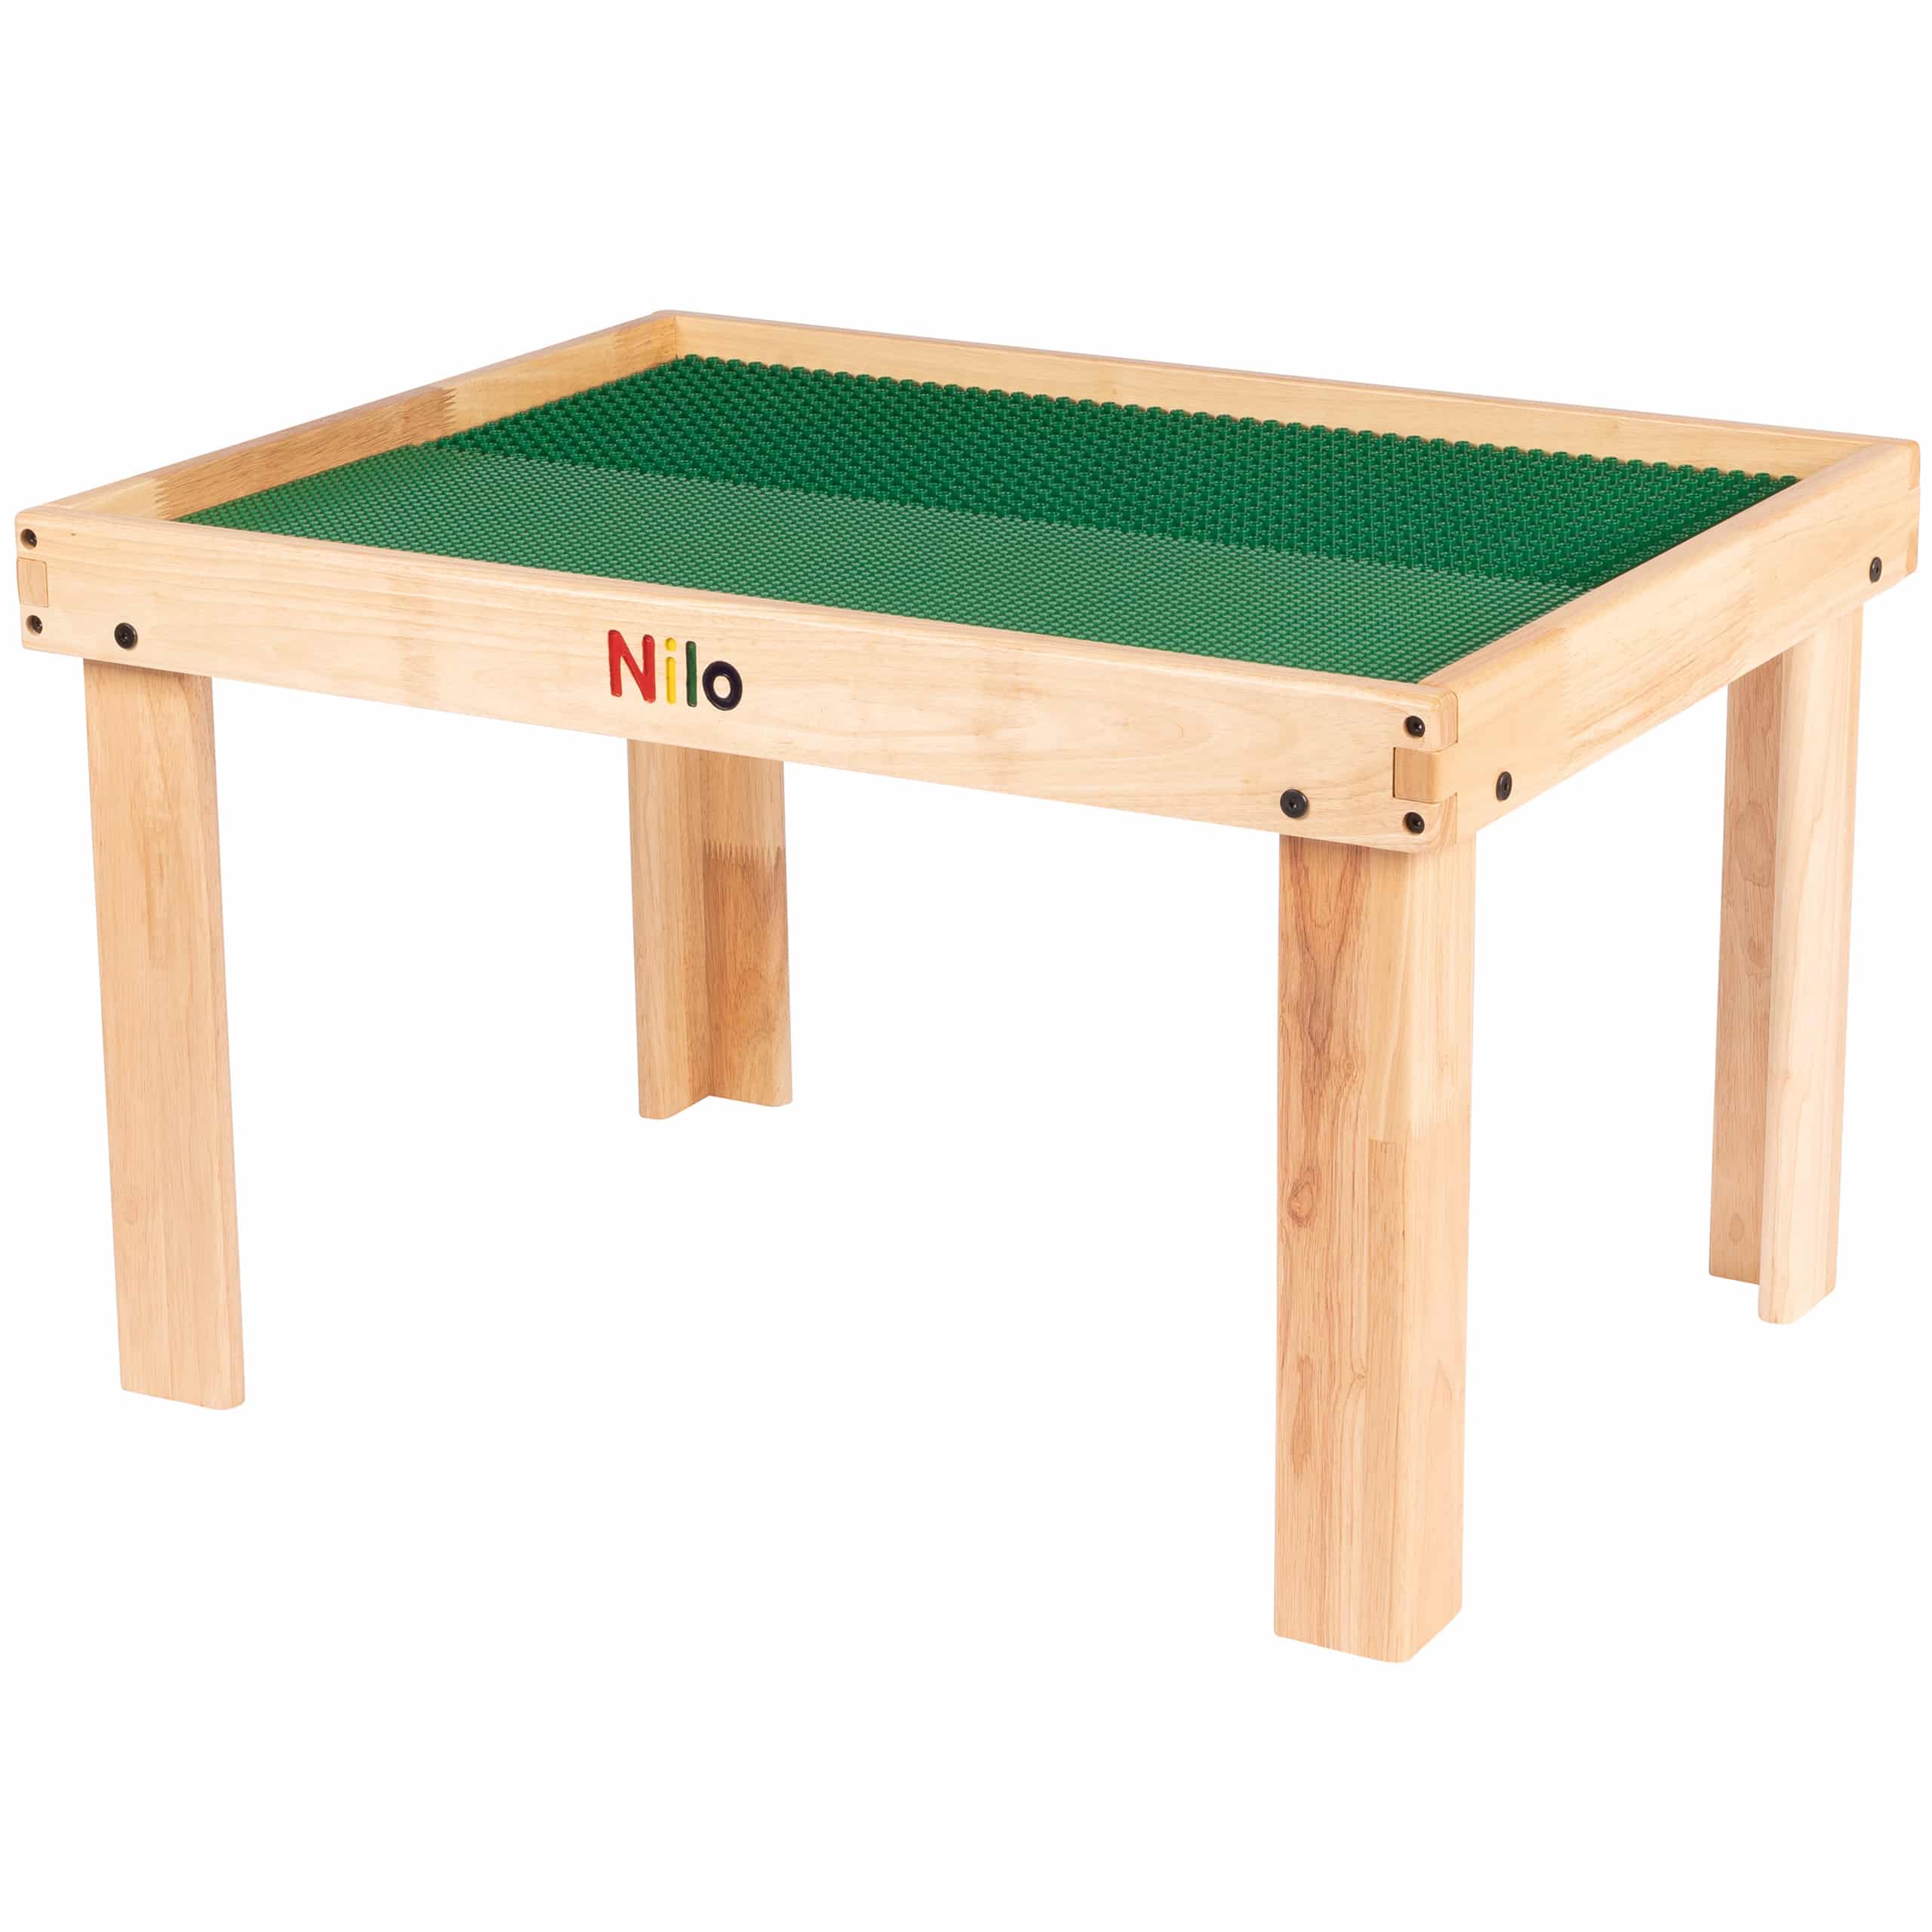 Small Nilo® Toddler Activity Table with Green Baseplates NO HOLES